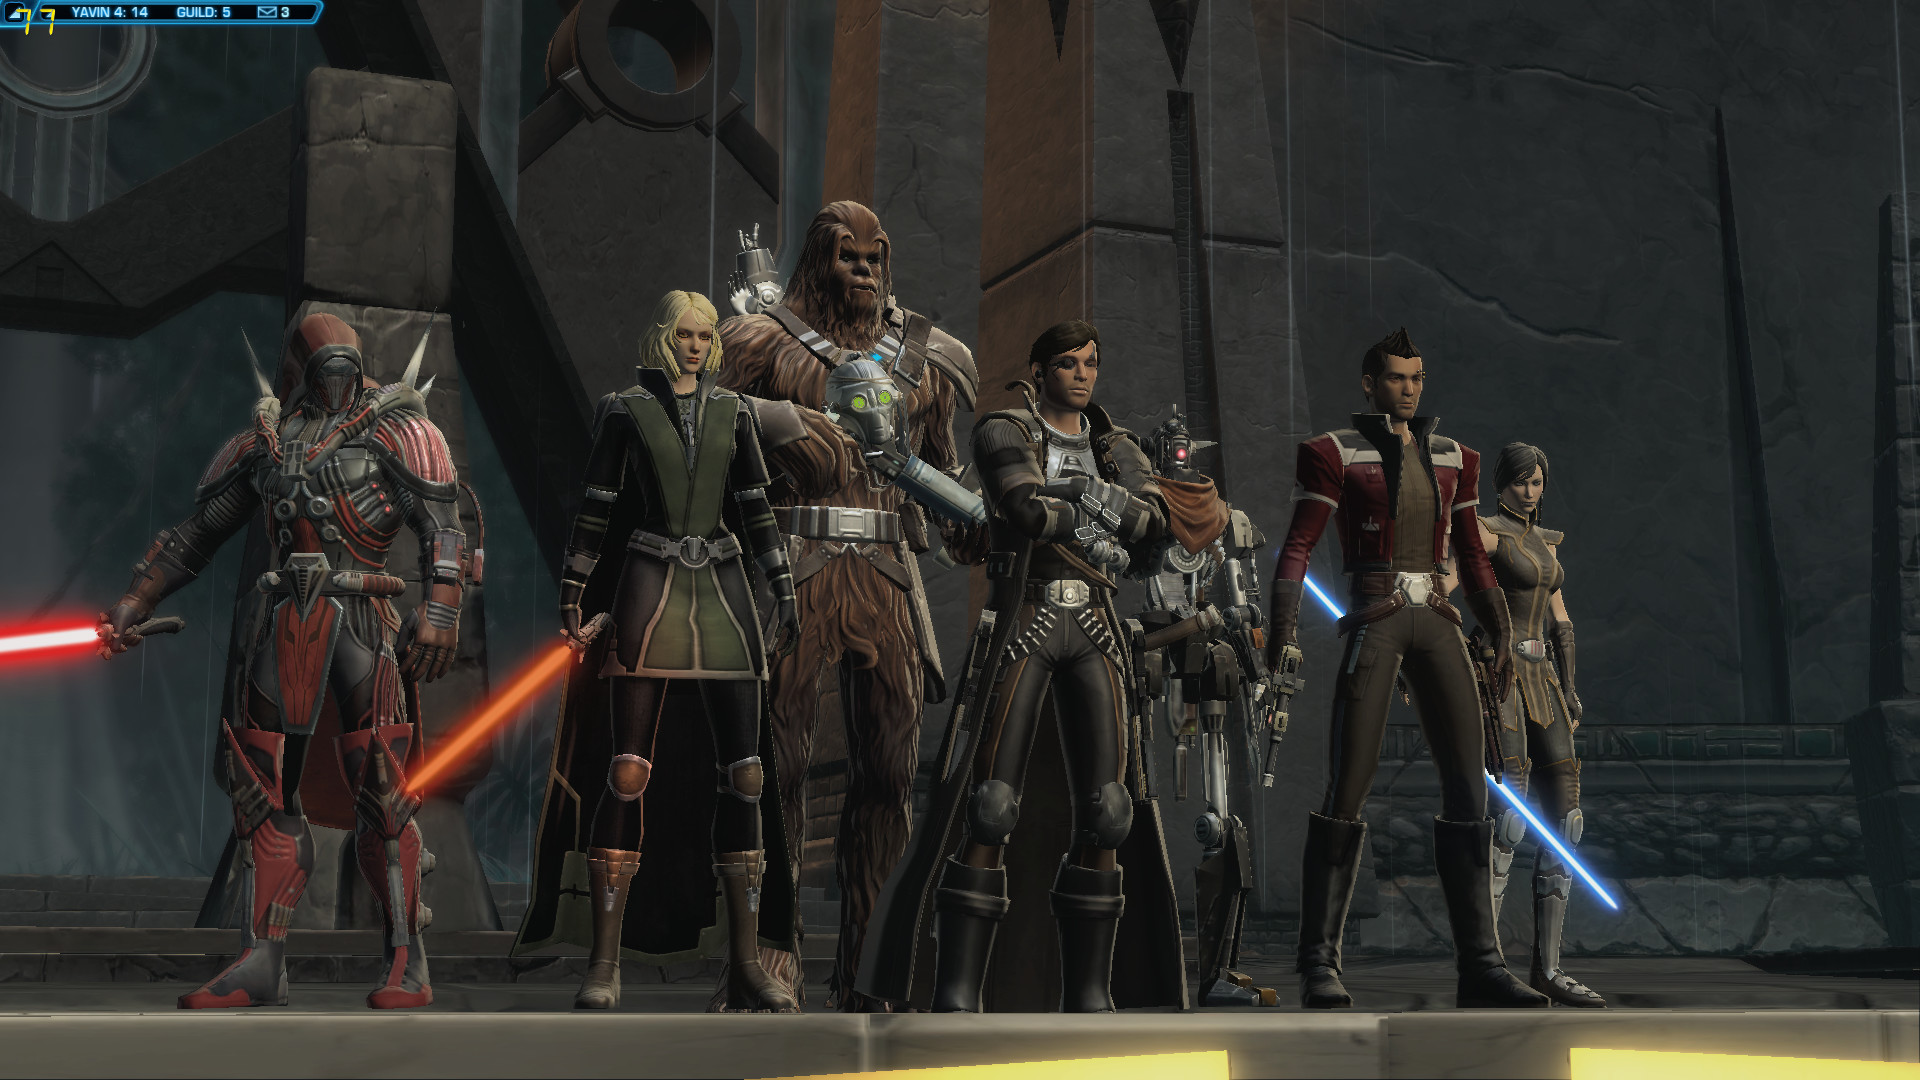 1920x1080 ... Swtor: Captain Vergil and the Coalition by DanteDT34